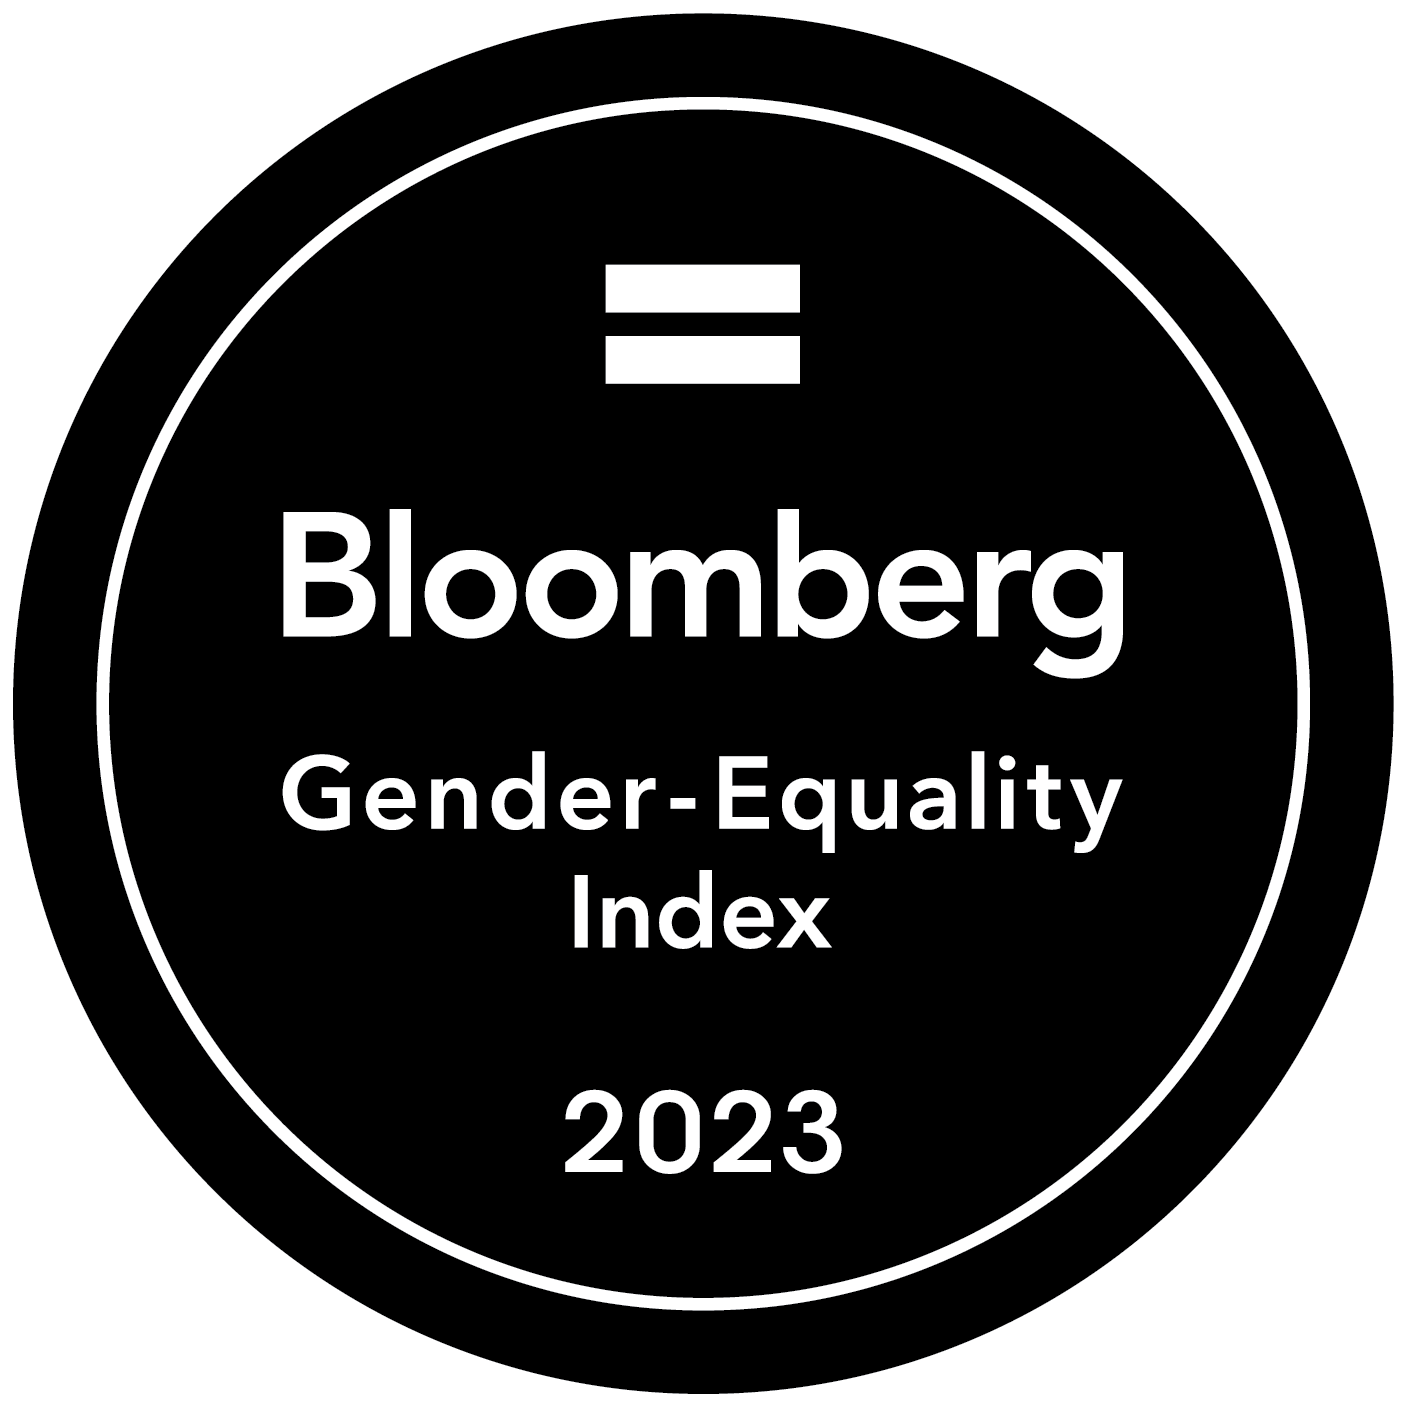 Icon of the Bloomberg Gender Equality Index for 2023. Portland General Electric received this recognition in 2023. The Bloomberg Gender-Equality Index tracks the financial performance of public companies committed to disclosing their efforts to support gender equality through policy development, representation and transparency.